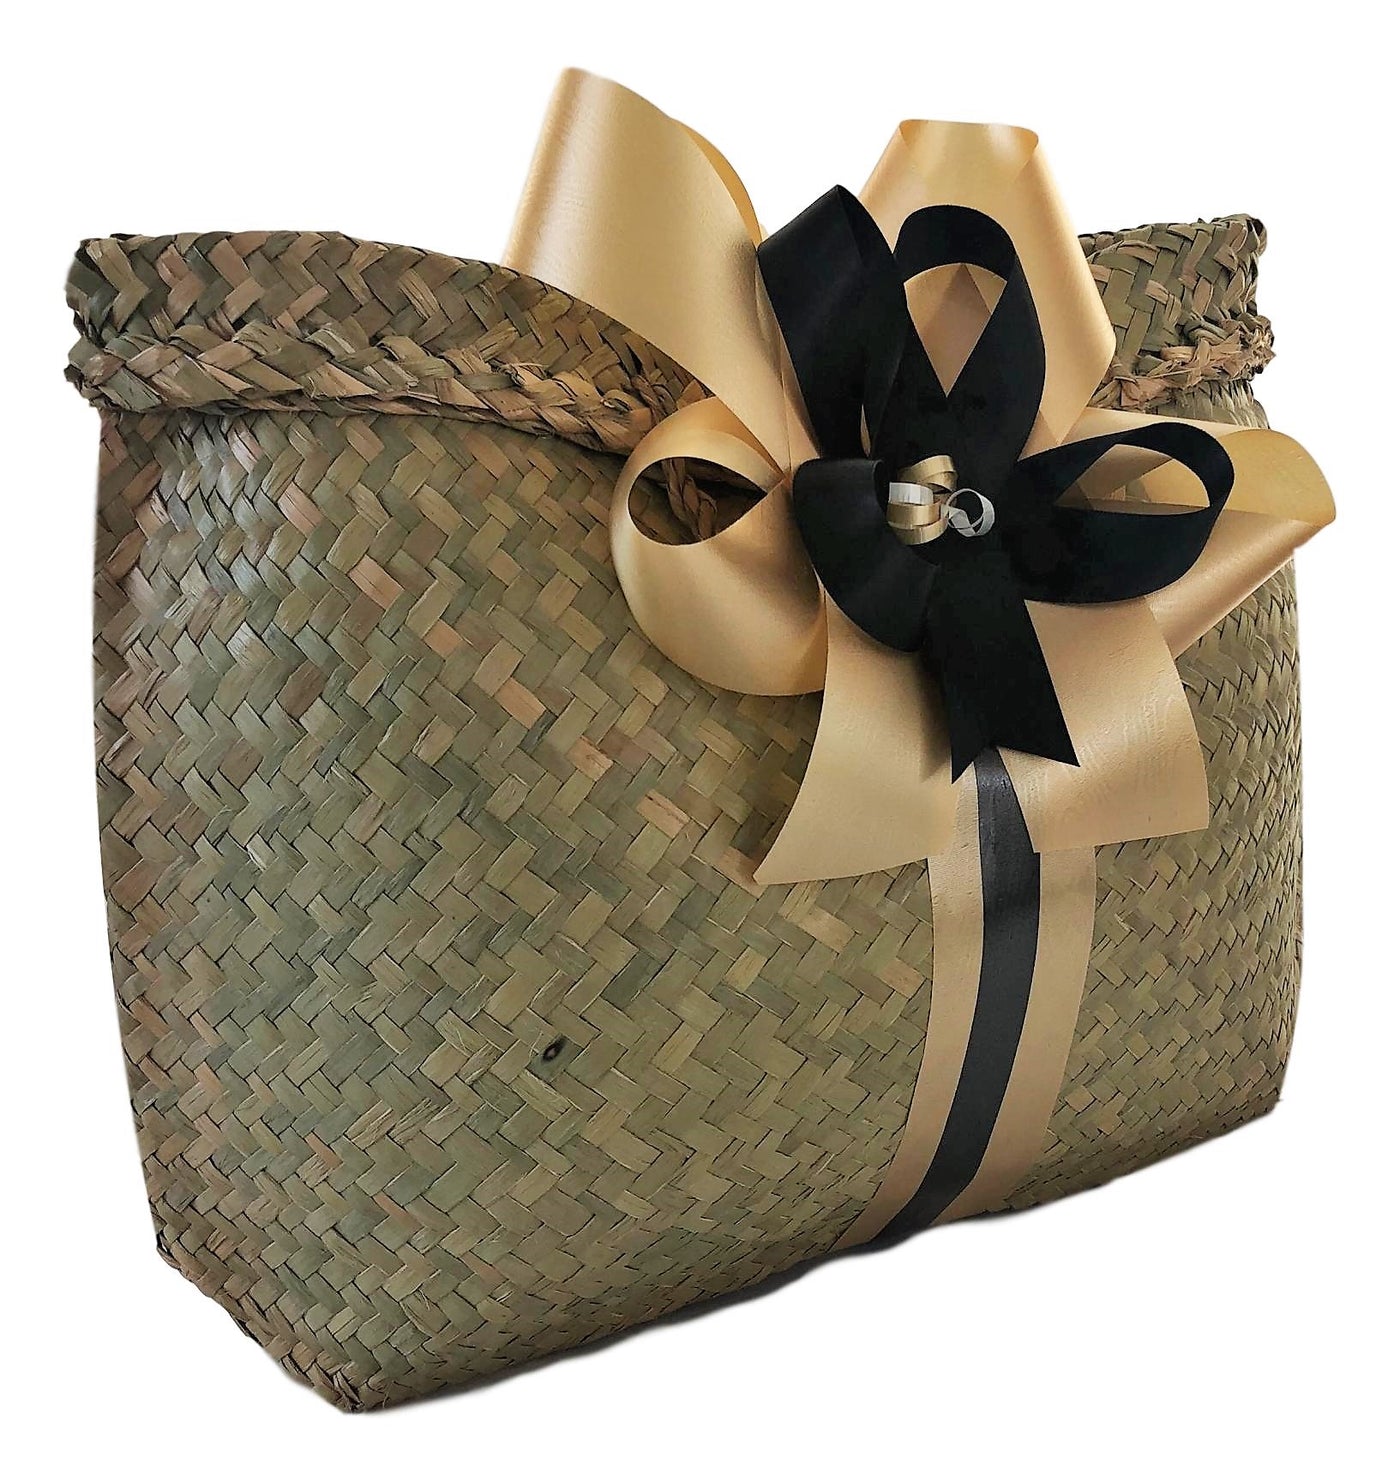 Non alcoholic Gift Baskets and Gift Hampers